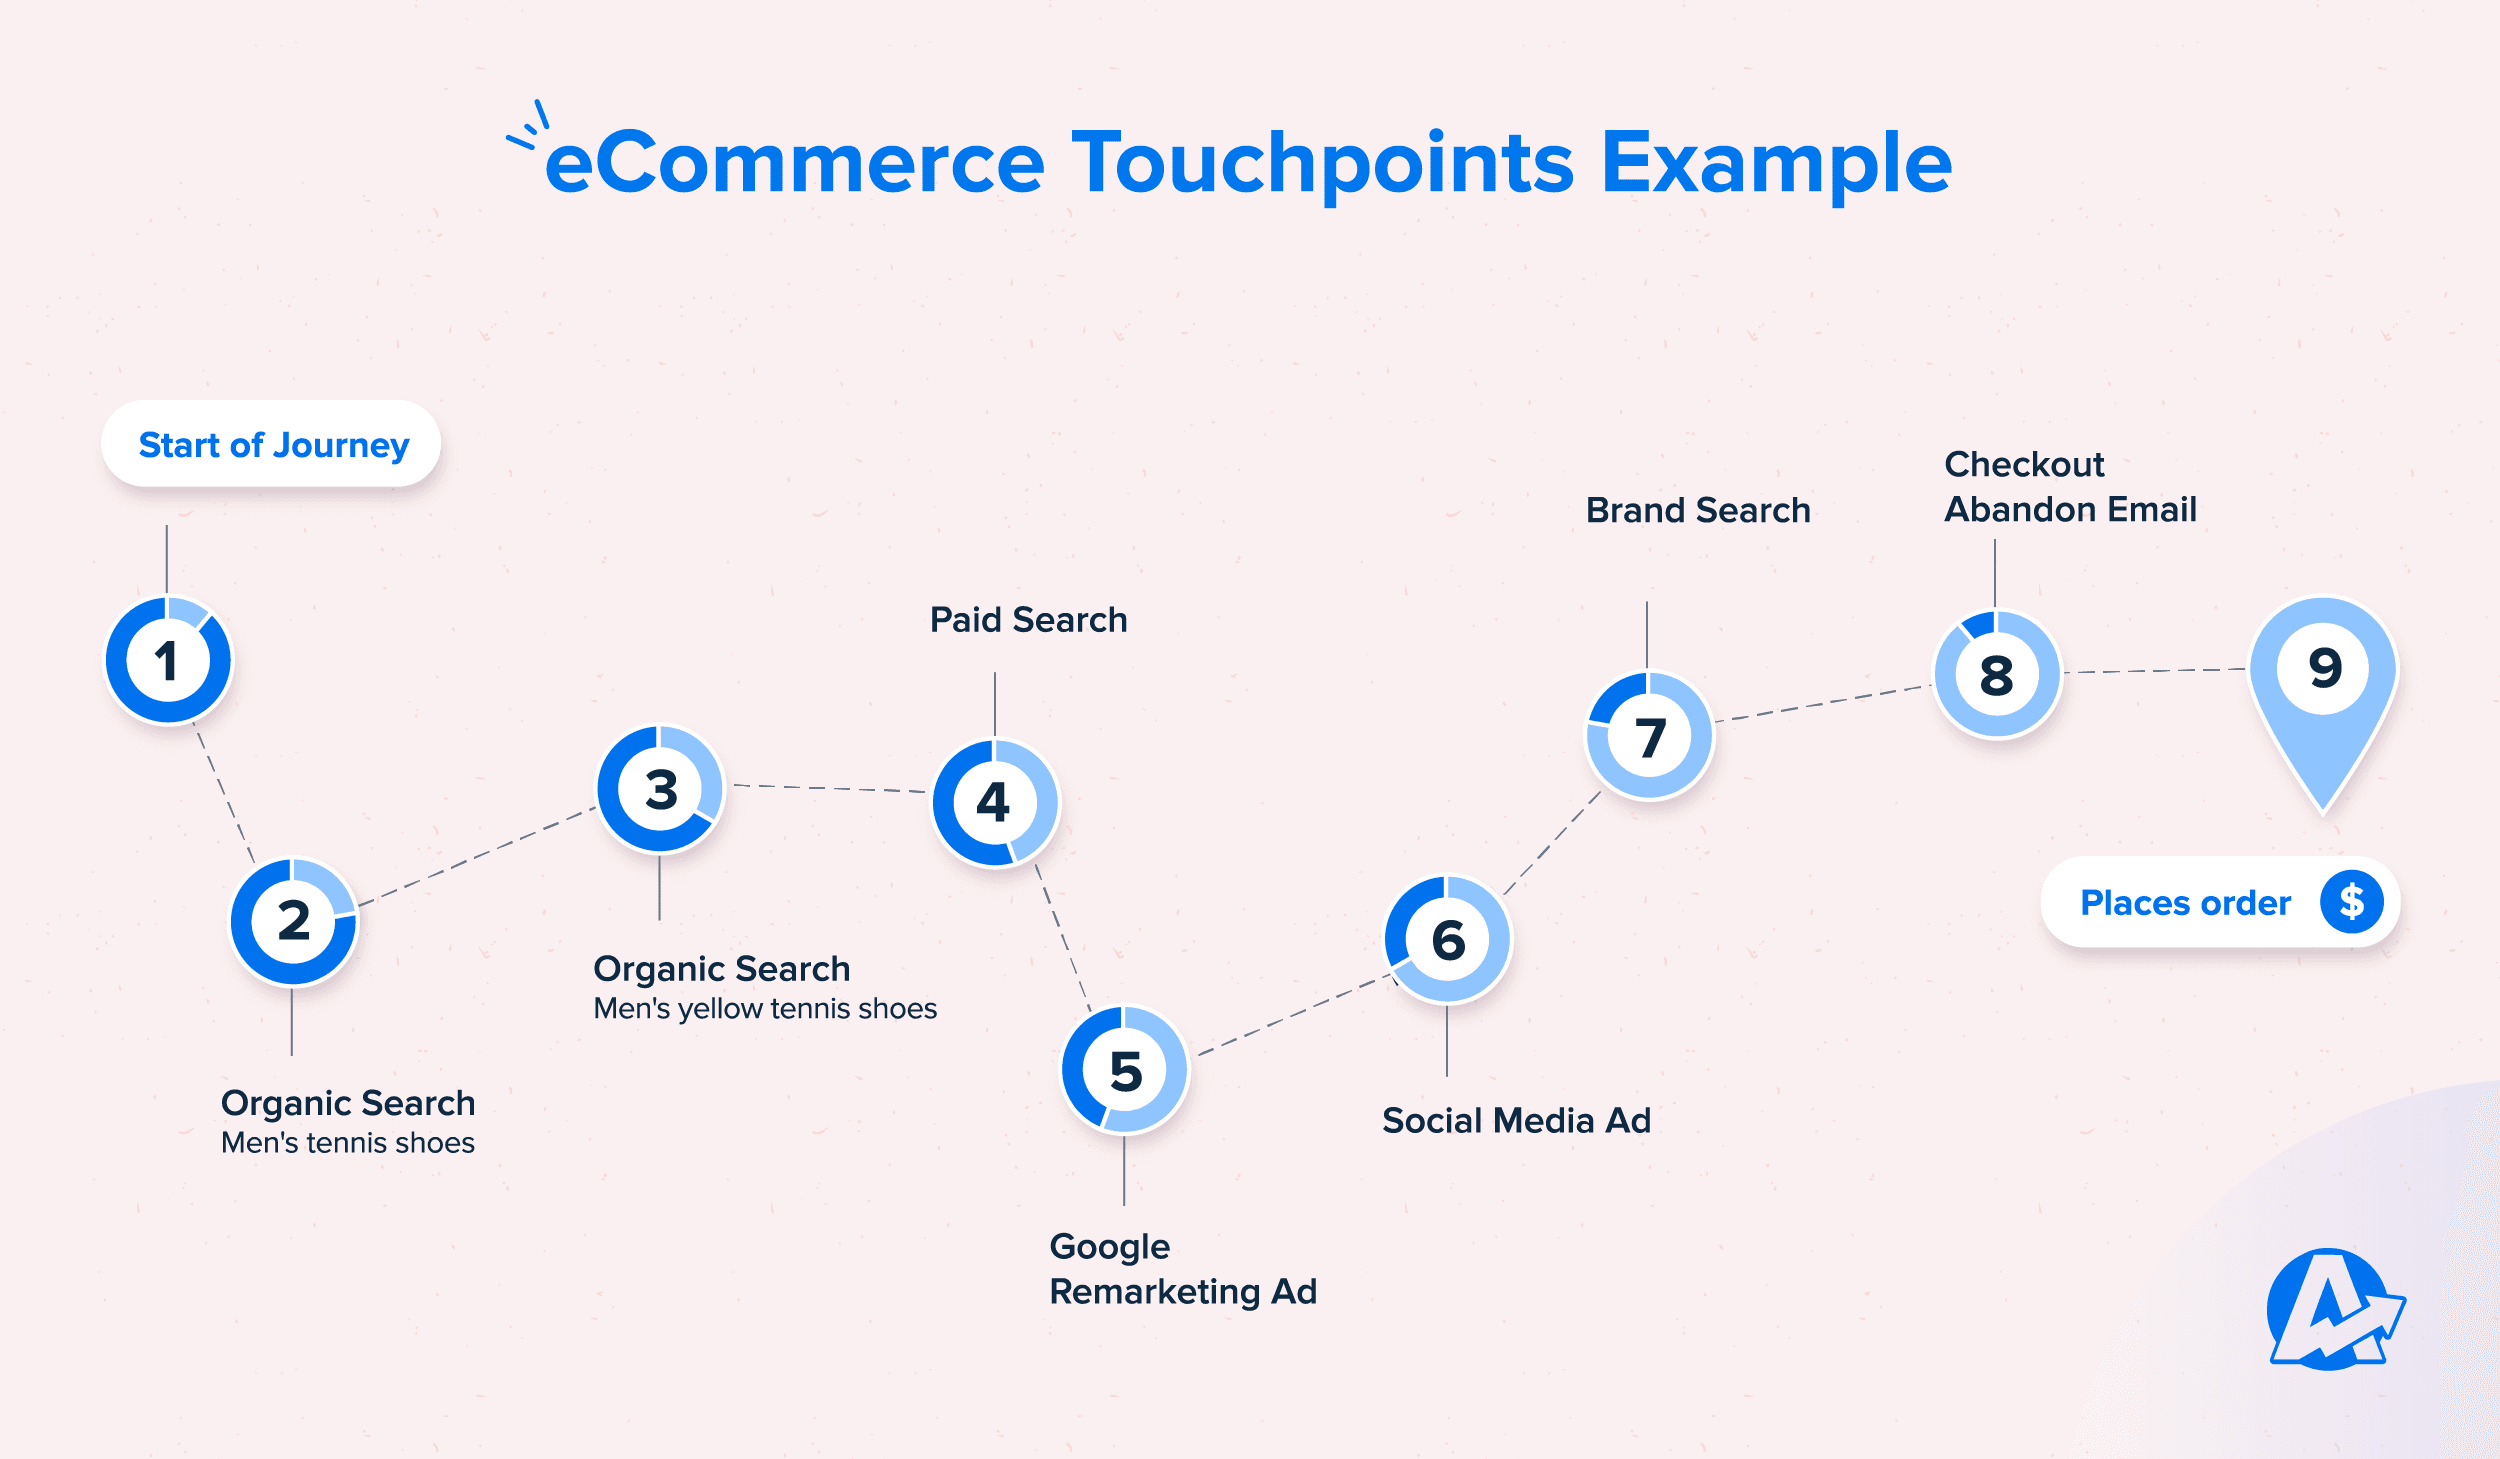 eCommerce touchpoint example